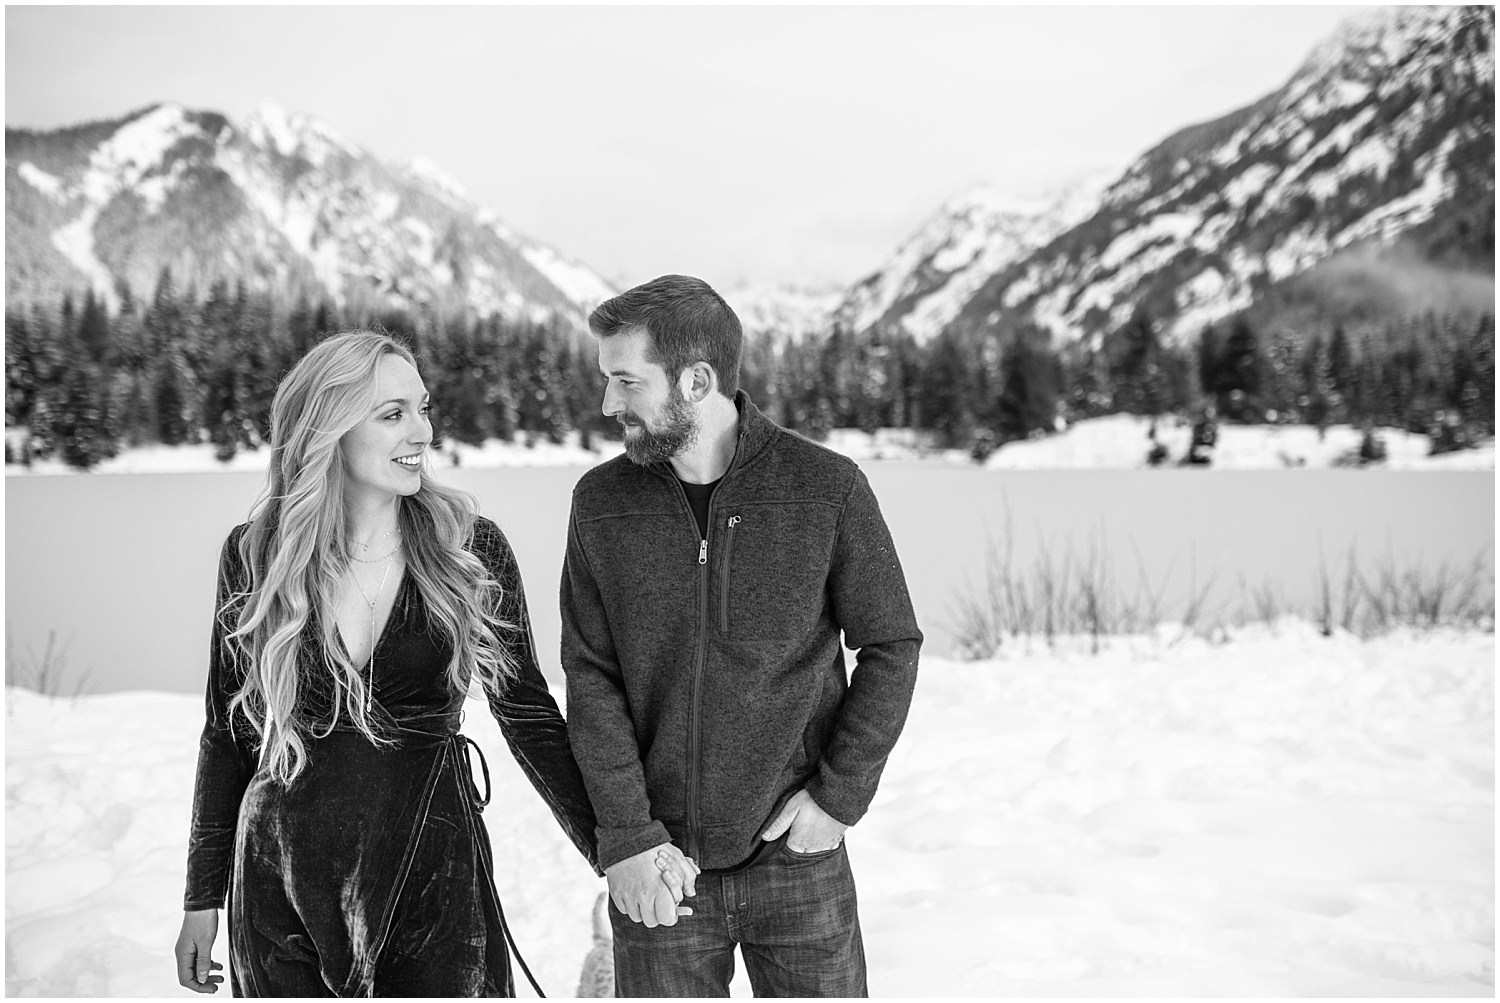 Snowy Winter Engagement Pictures at Snoqualmie Pass